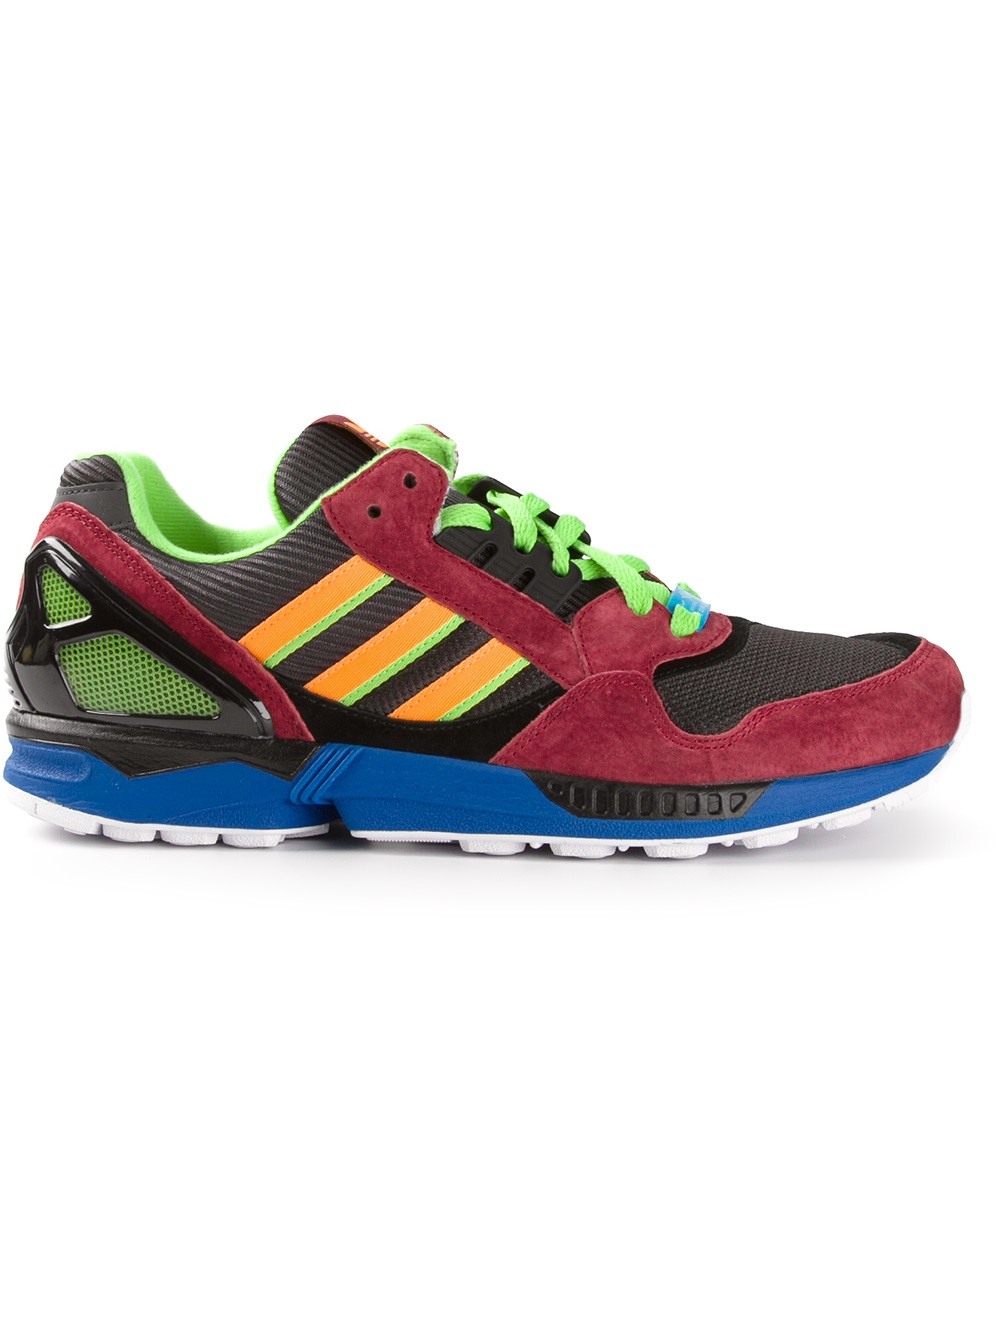 adidas Zx Trainer for Men - Lyst